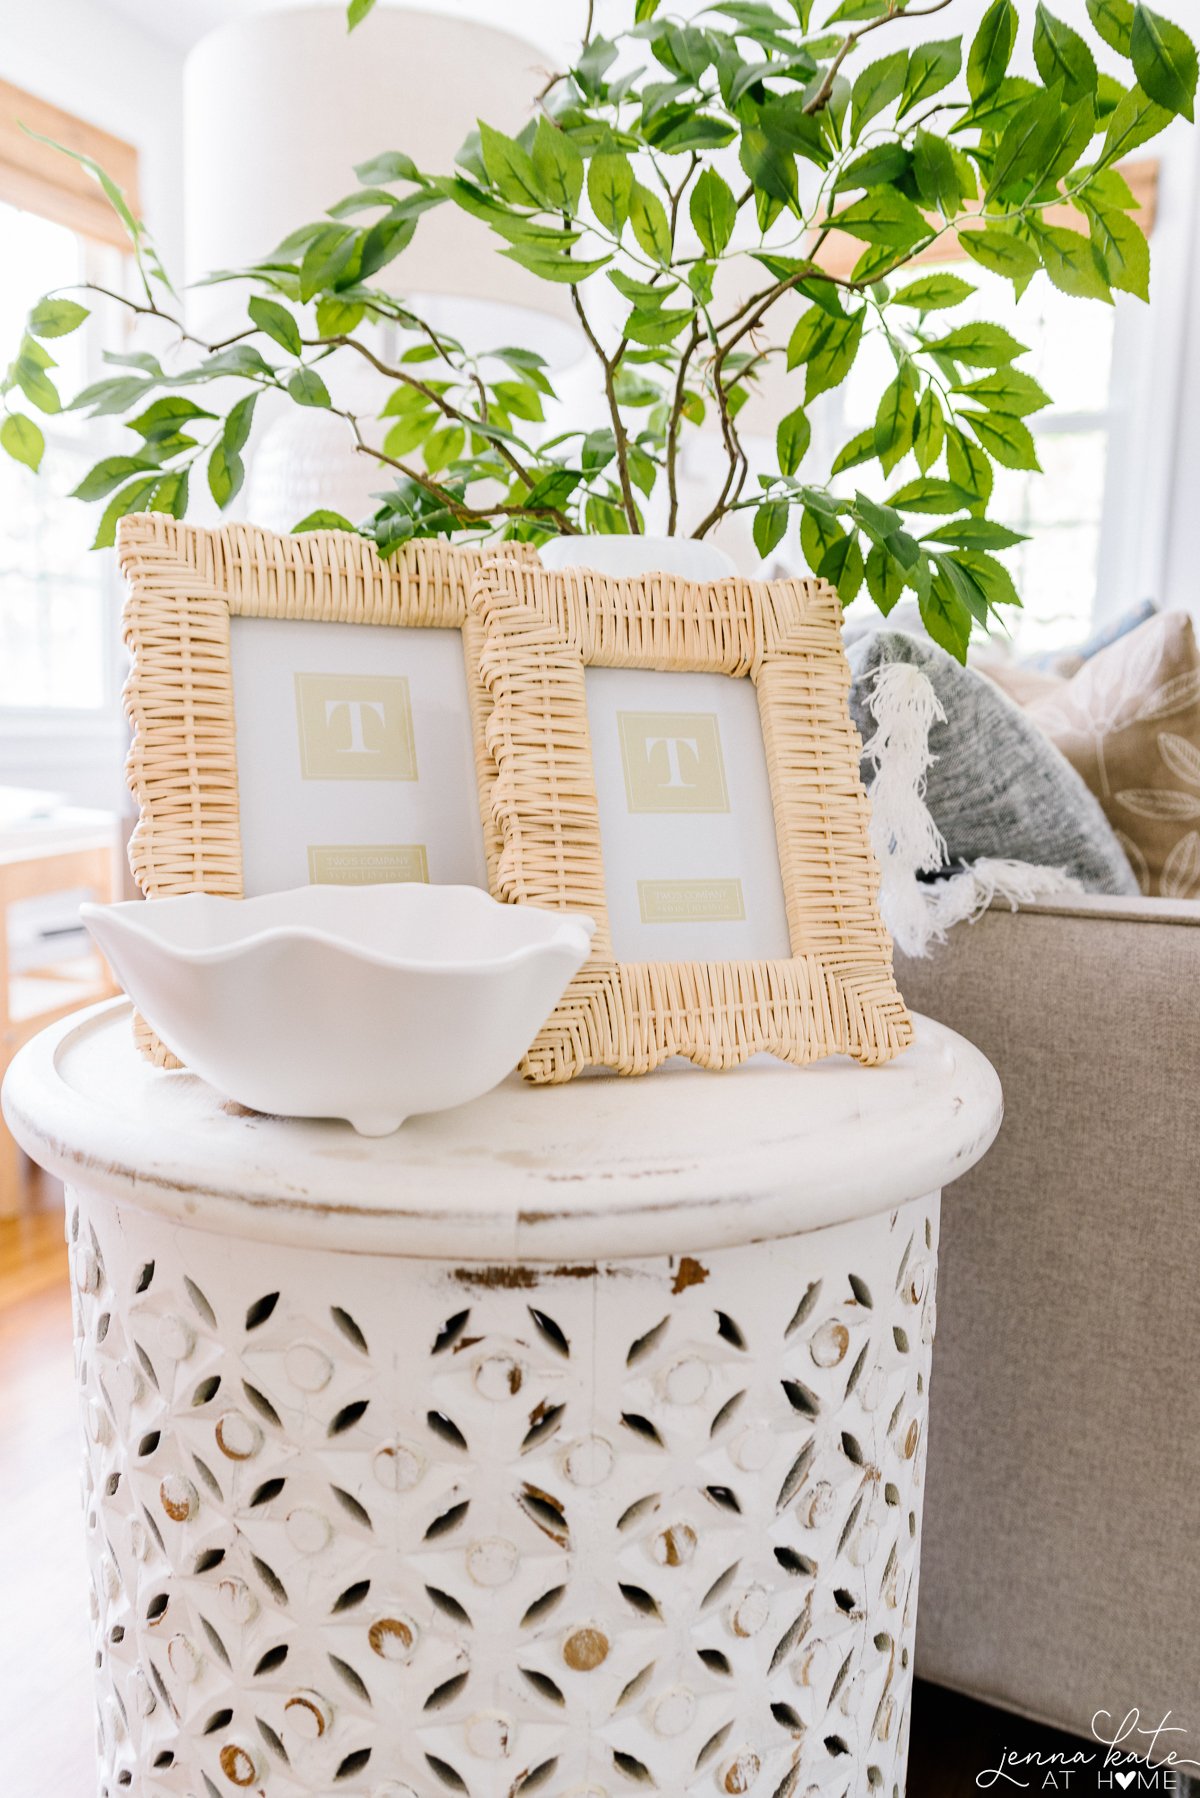 end table with scalloped rattan picture frames and green leafy stems in a vase